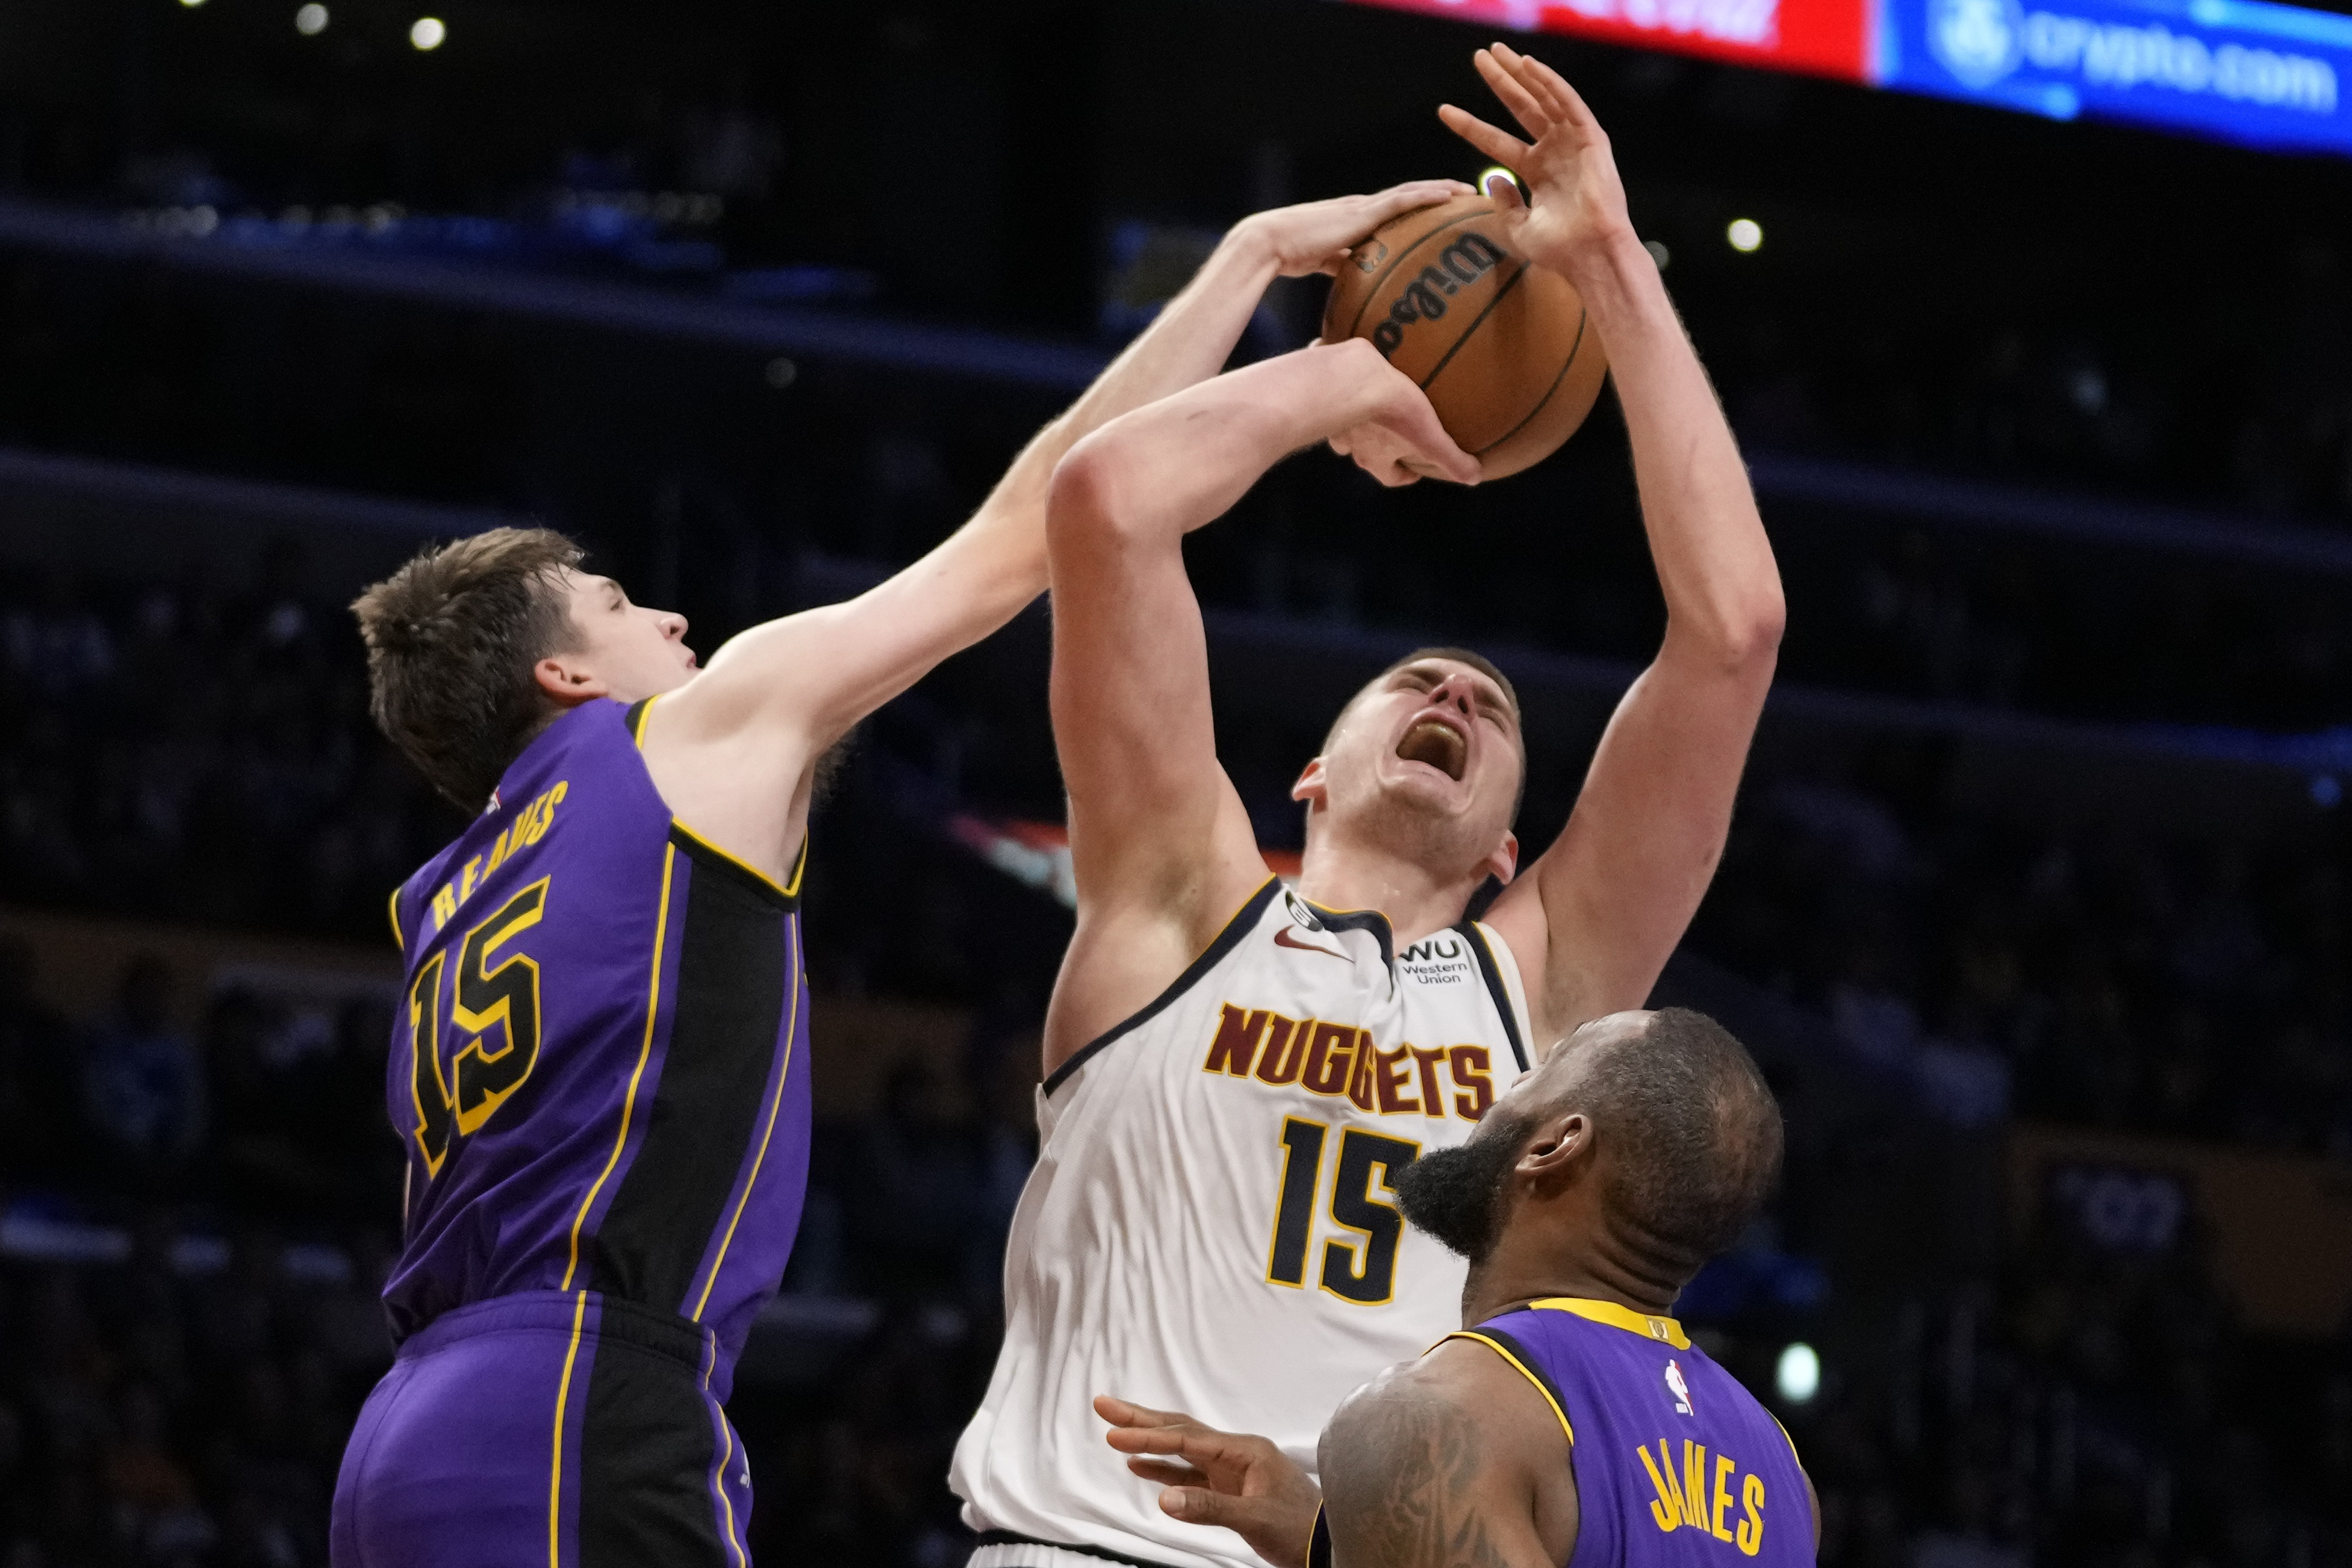 Lakers charge back but Nuggets hold on to take Game 1